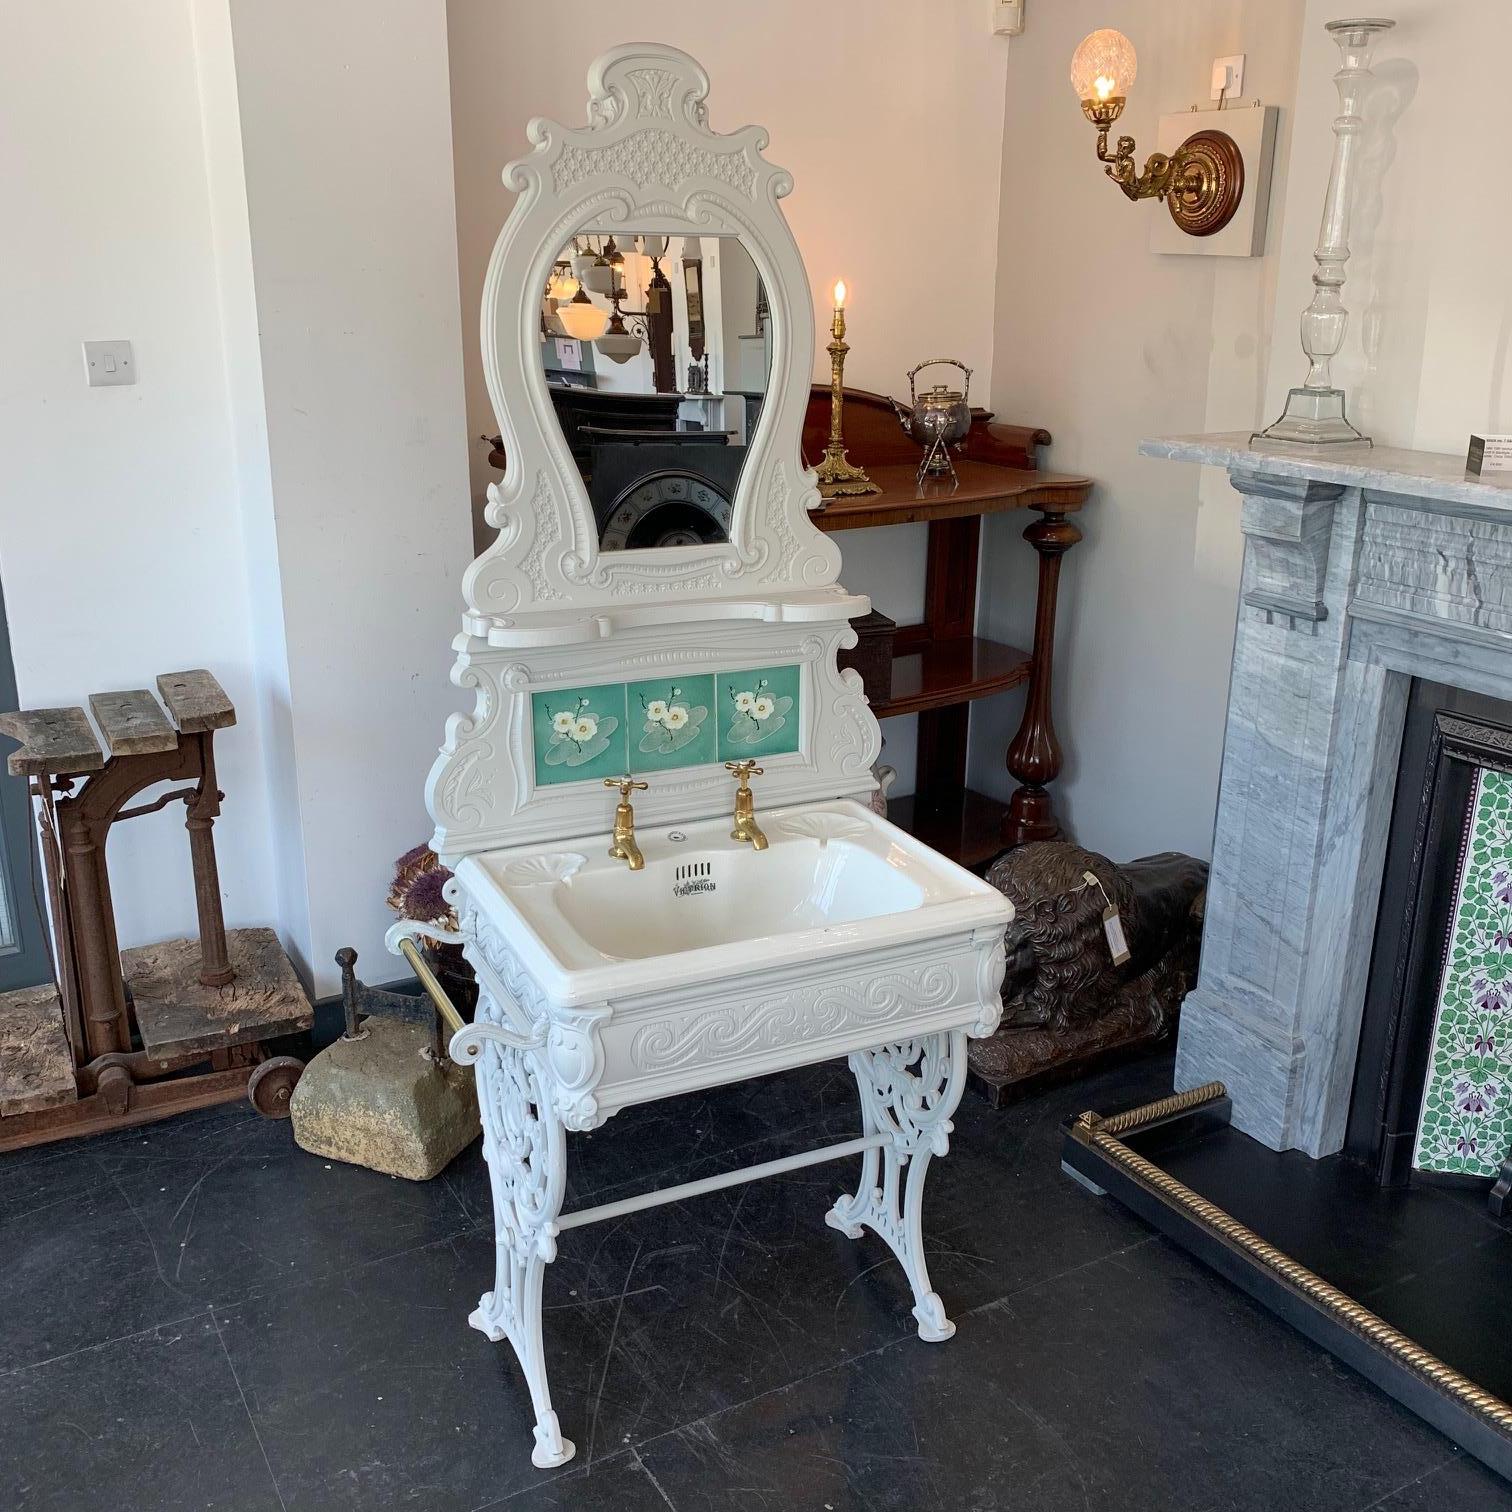 Edwardian cast iron wash Stand with tiled and mirrored splash-back, complete with original basin, unlacquered taps and brass towel rail which can be positioned either side of the Stand, circa 1905. The cast iron has been primed so it can be painted